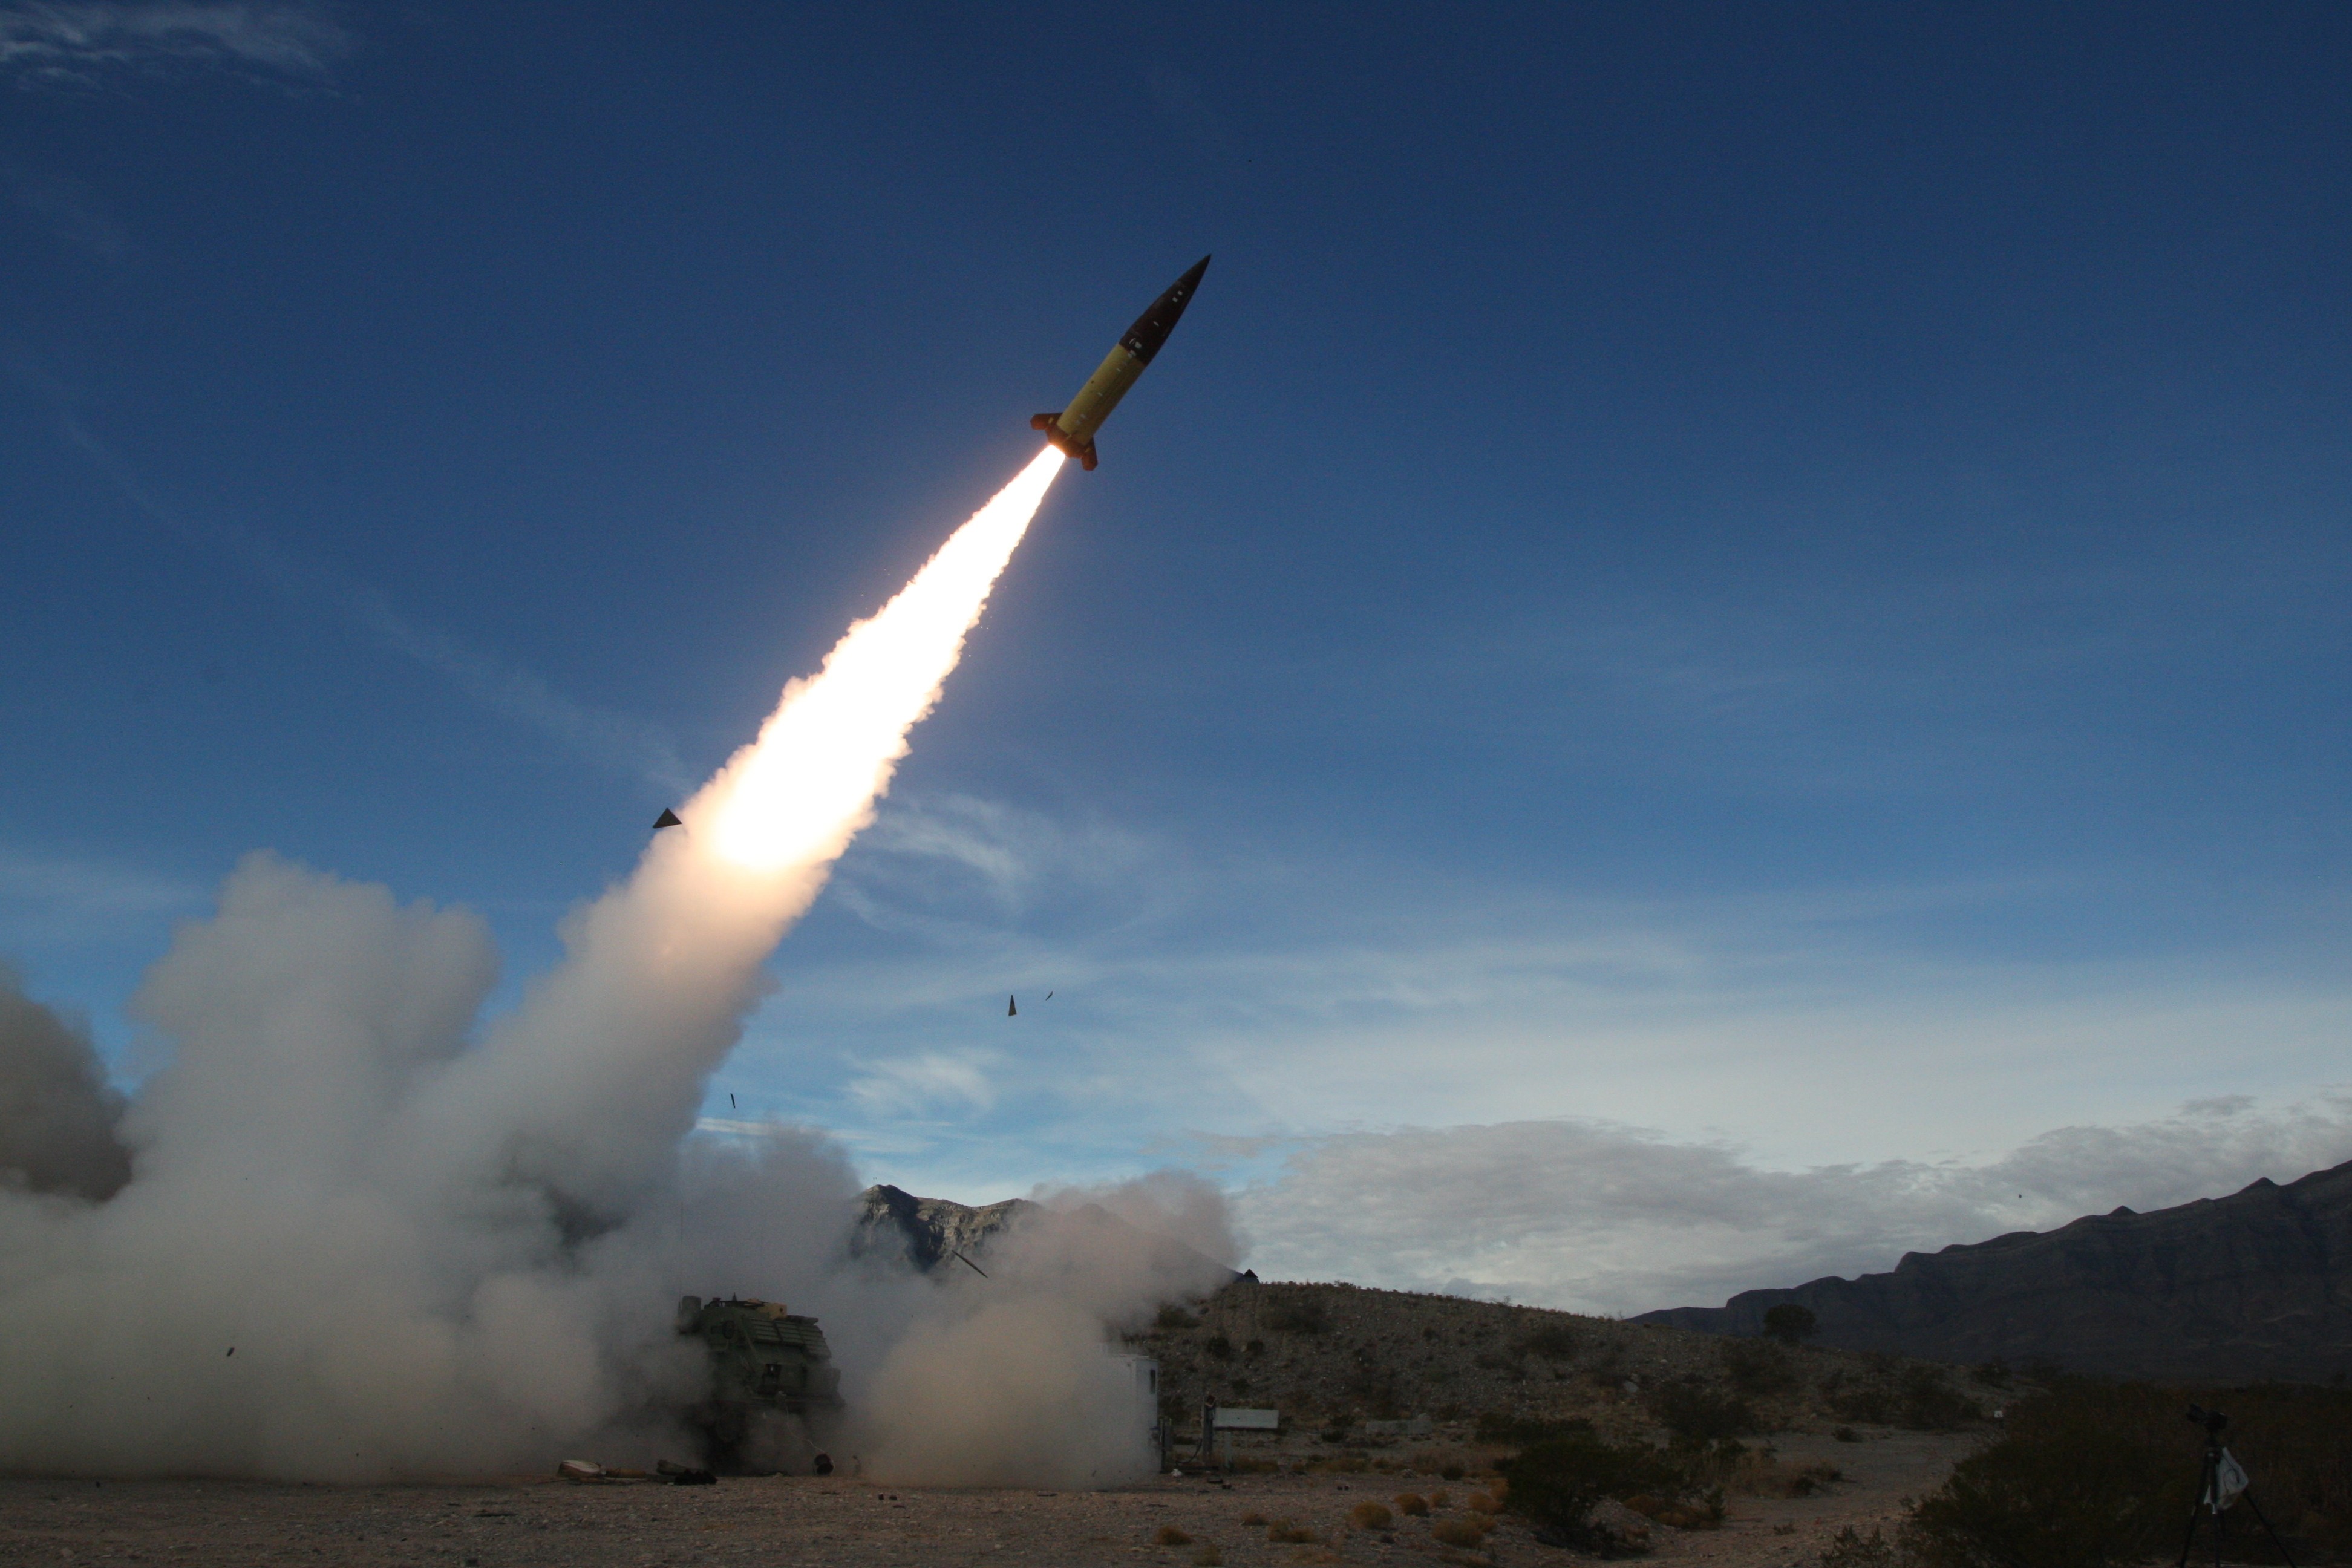 US soldiers conduct Army Tactical Missile System live fire testing at White Sands Missile Range, New Mexico, in December 2021. Ukraine has used US-provided long-range missiles to strike targets in Russian-occupied areas. Photo: US Army via AP